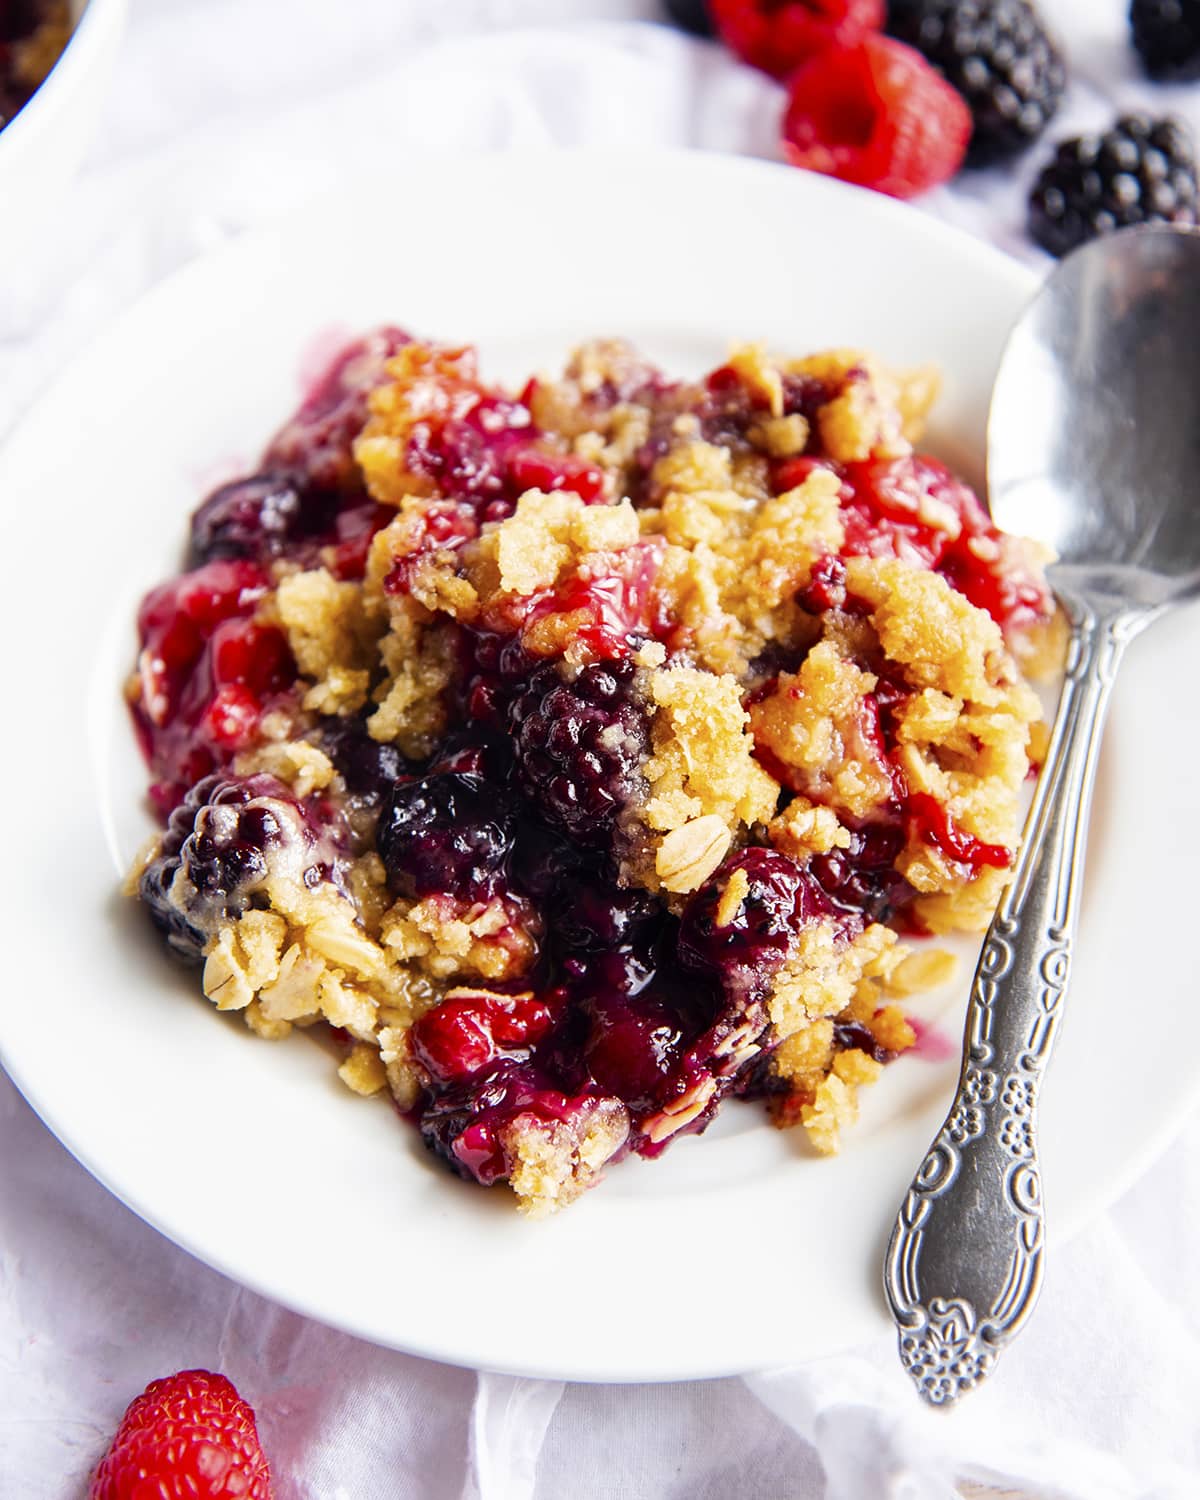 Berry crumble with blackberries, raspberries, and blueberries on a plate.